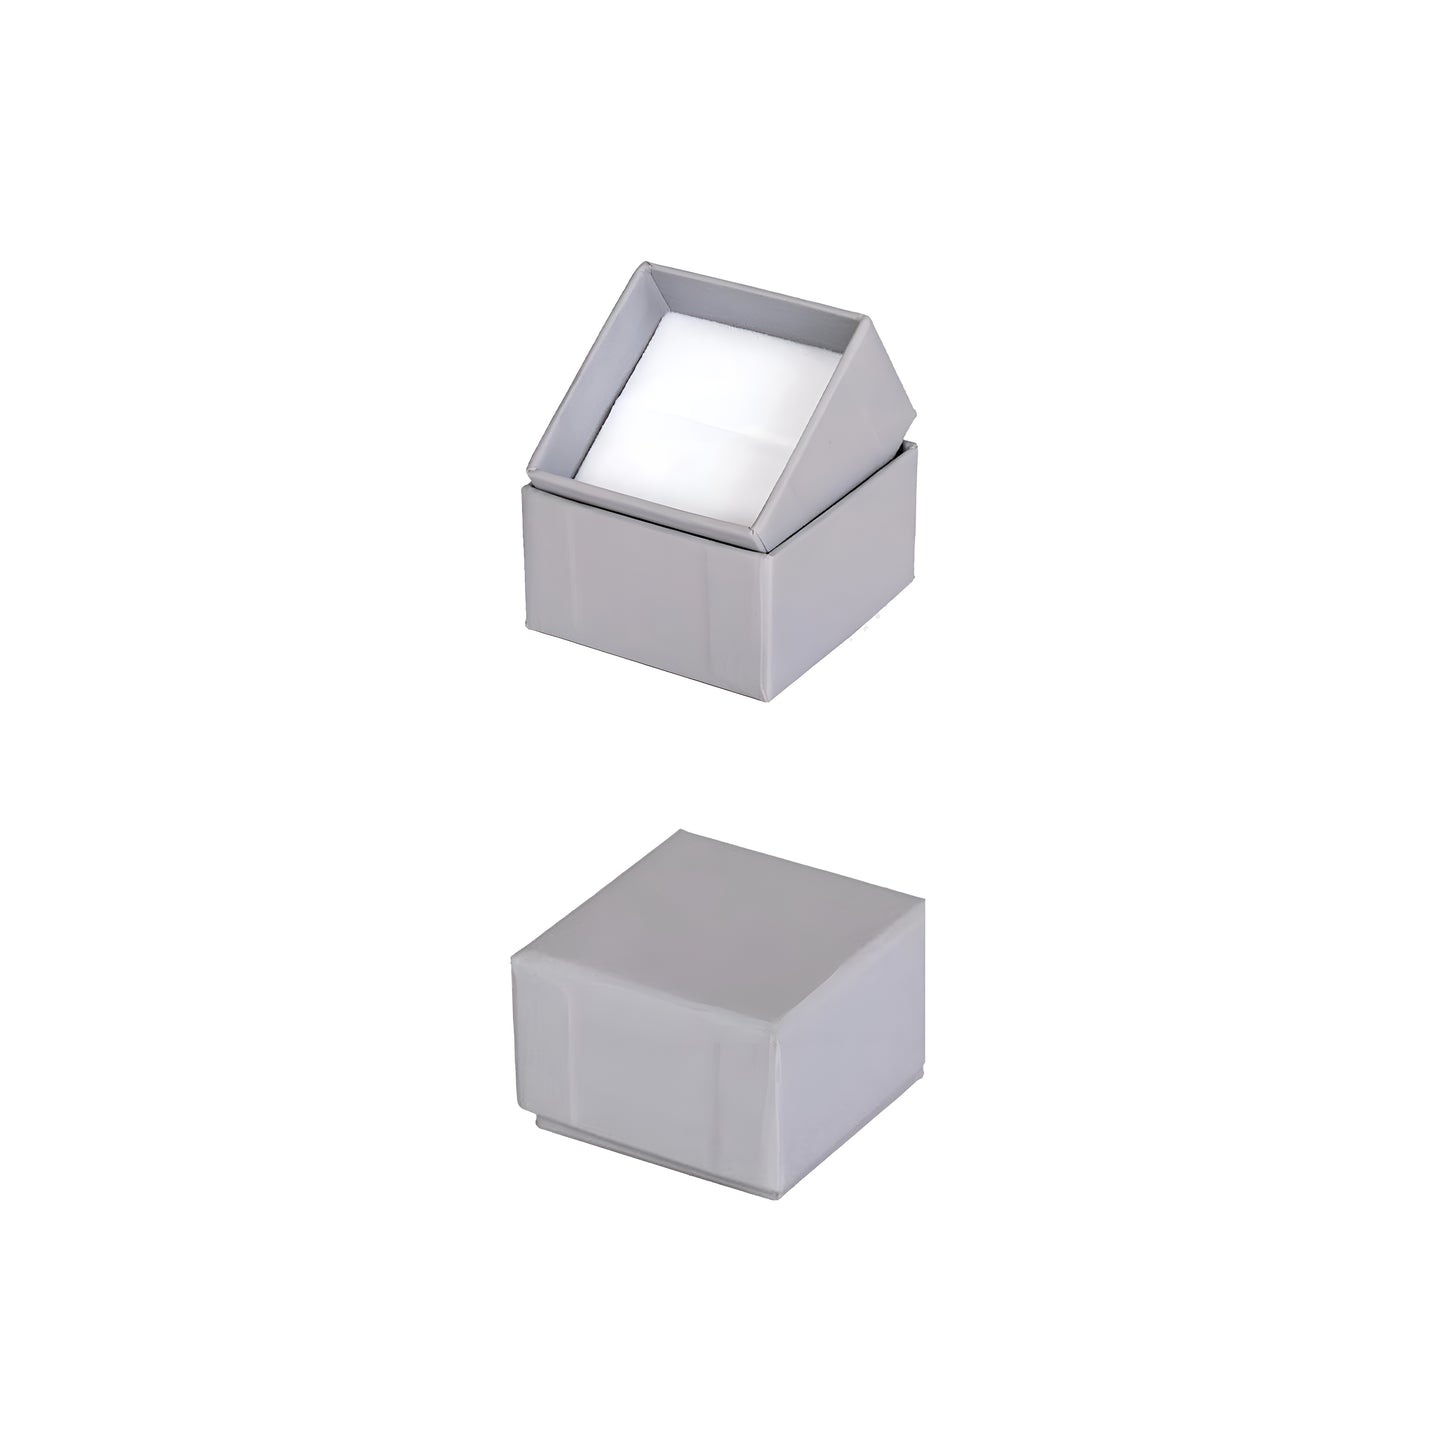 Prague Luxury Card Ring Boxes (Pack of 10)